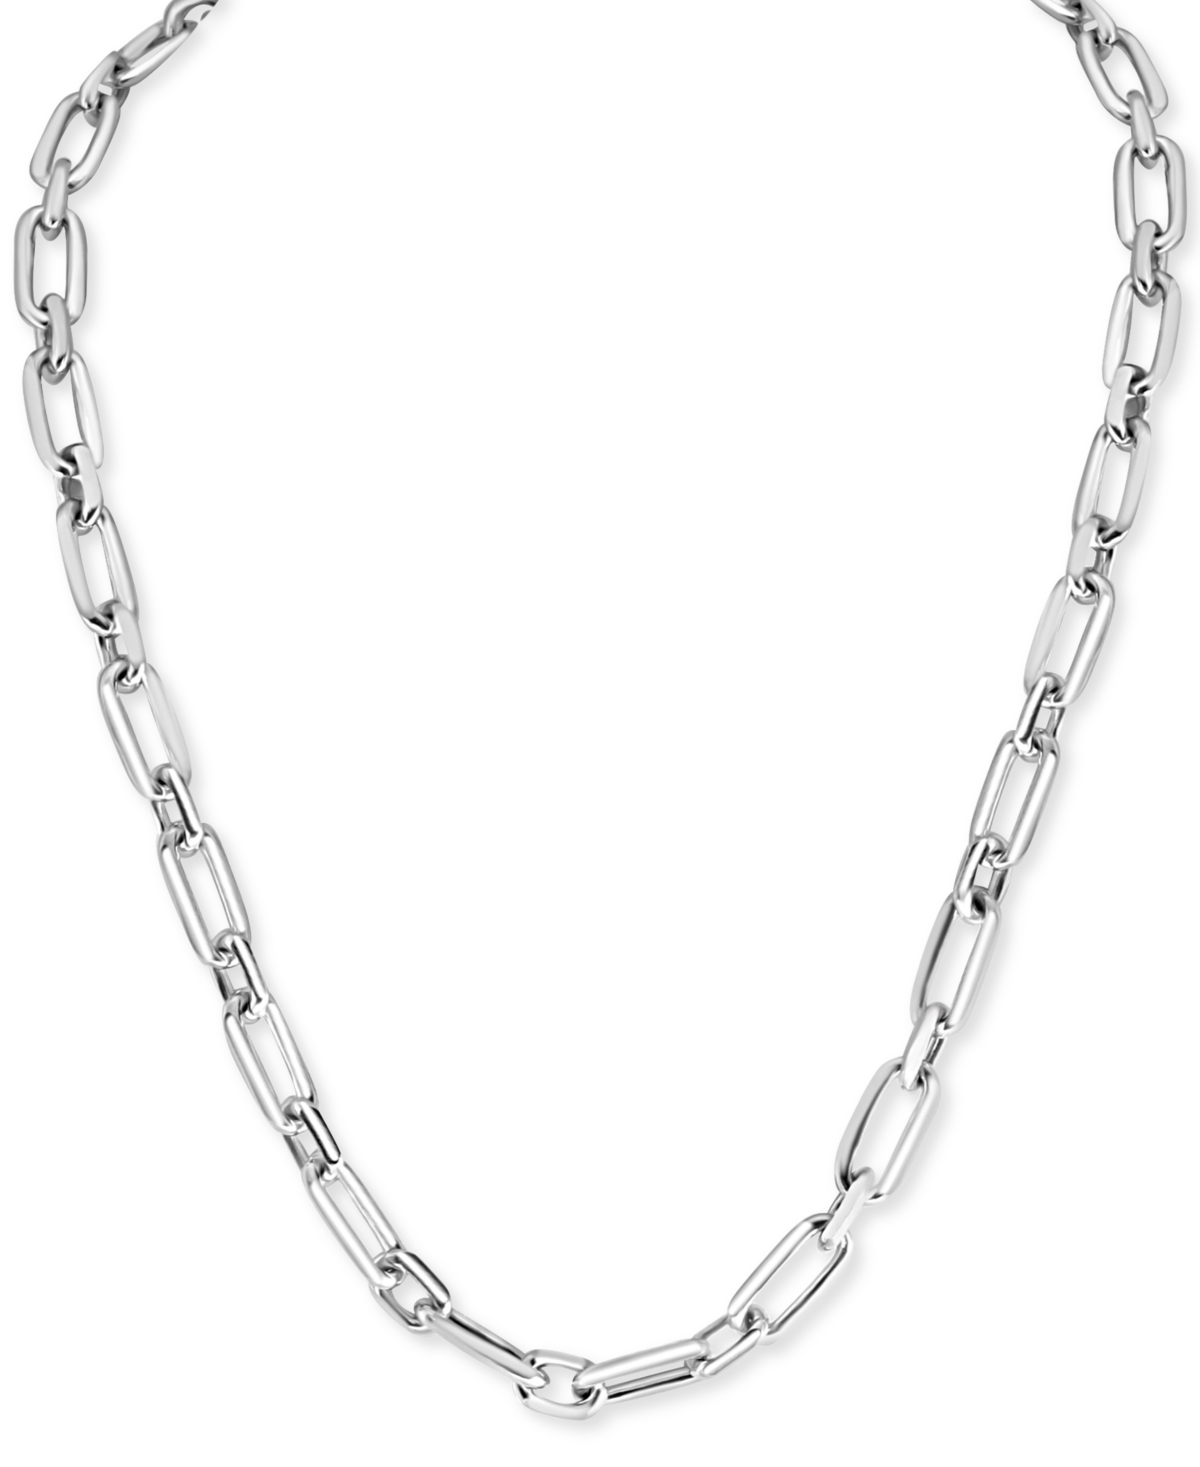 Effy Men's Large Oval Link 22" Chain Necklace in Sterling Silver - Silver